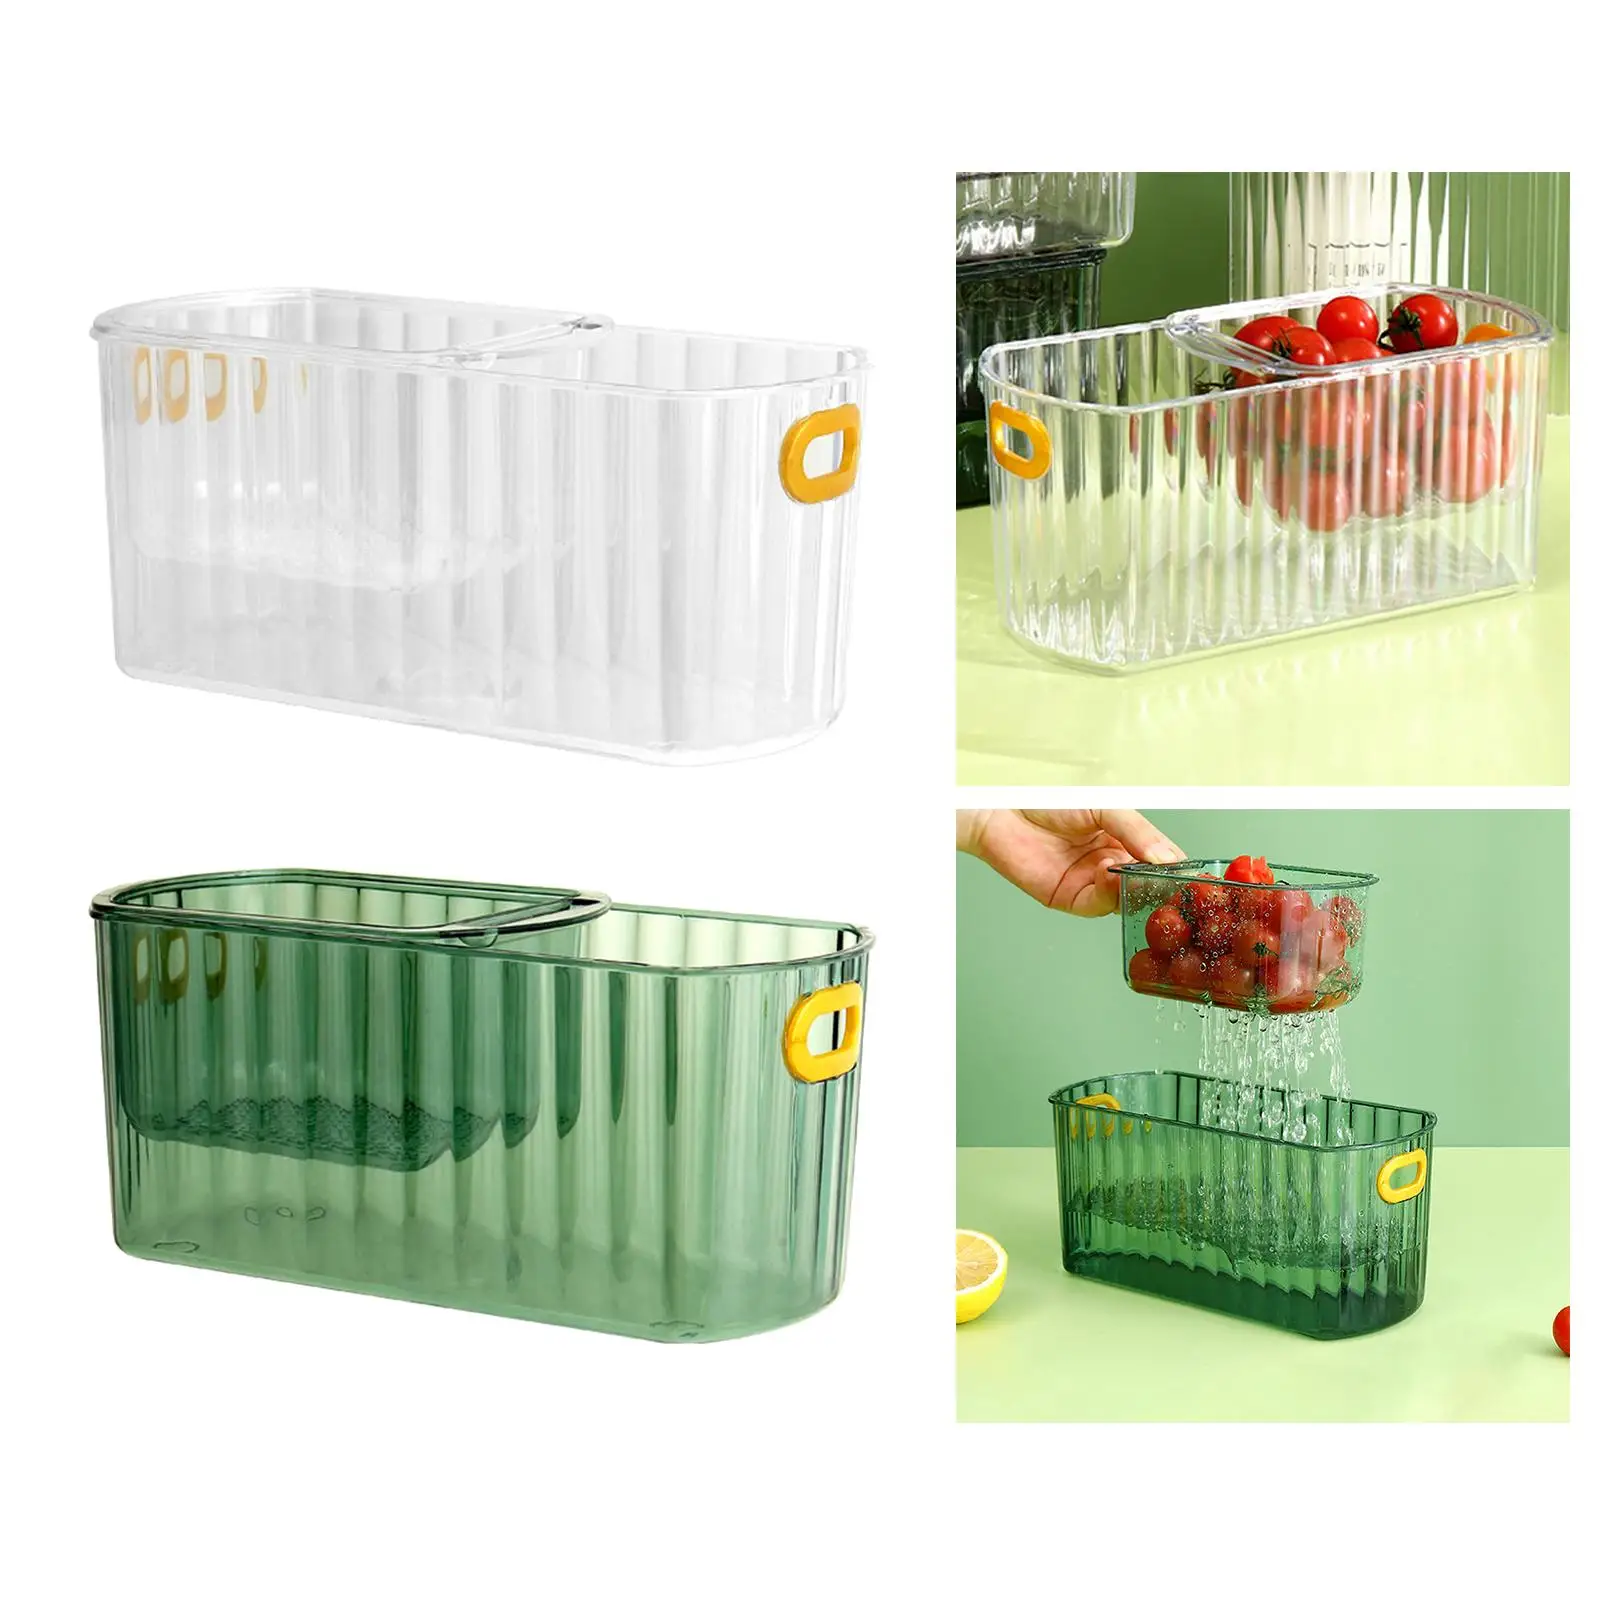 Multifunctional Fruits Storage Basket Separate Tea Residues with Drain Hole Candy Box Snack Tray for Living Room Home Decoration